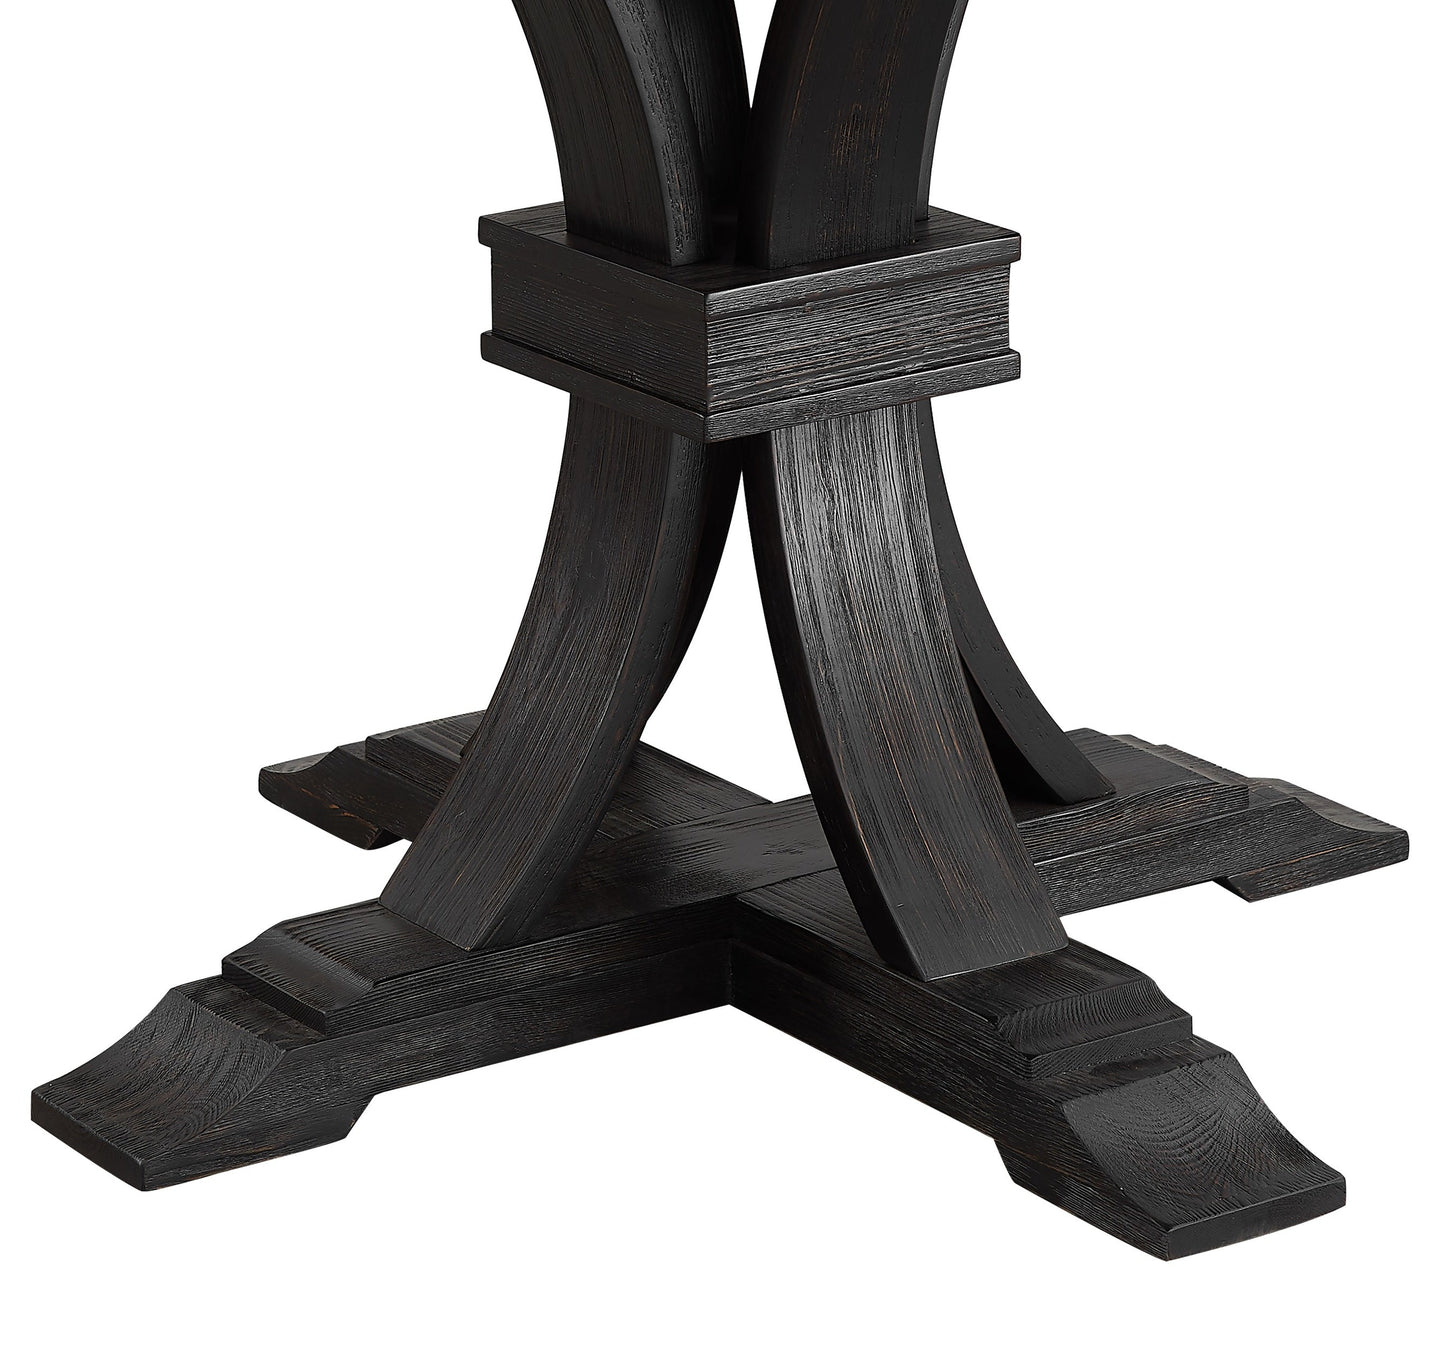 Siena Distressed Black Finish 5-Piece Dining set, Pedestal Round Table with Tan Upholstered Chairs